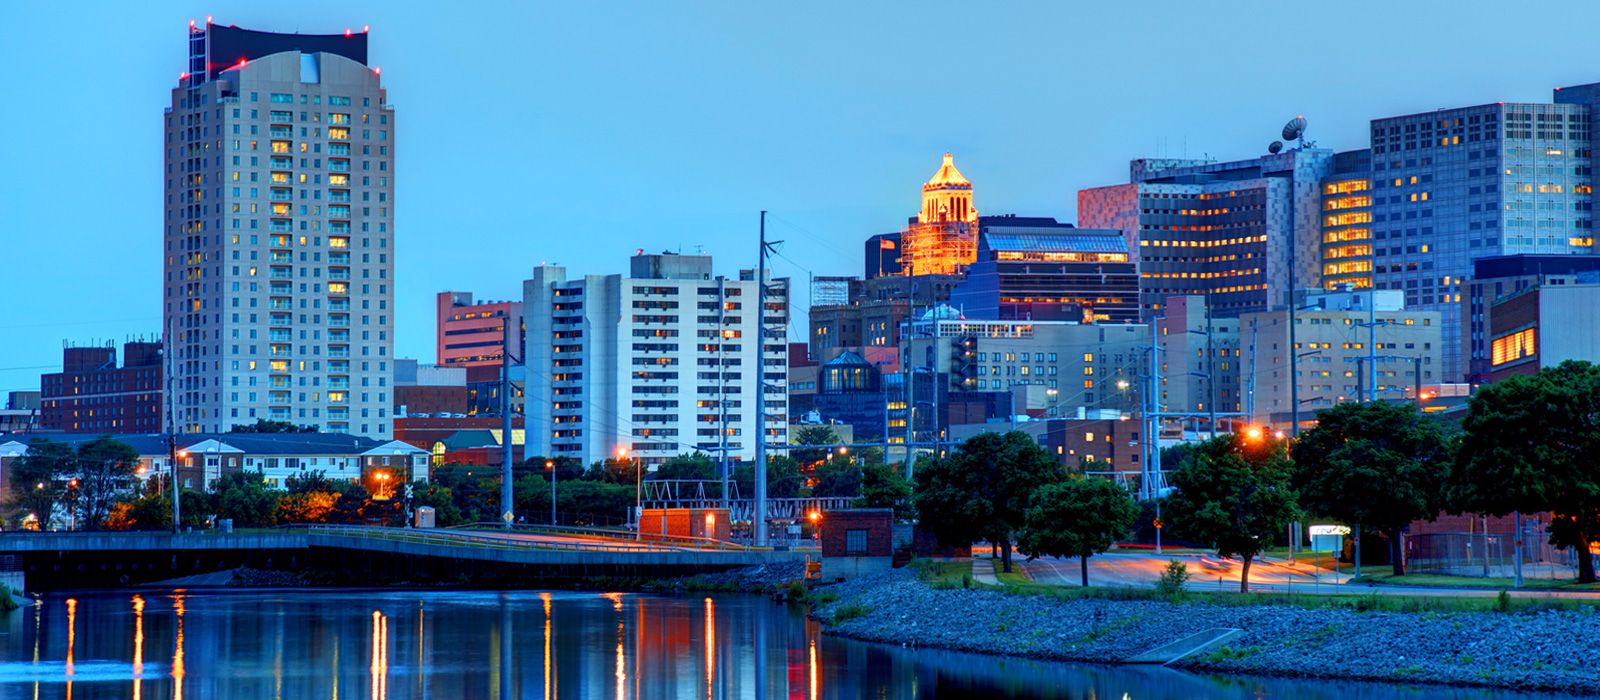 view-of-rochester-minnesota-at-night